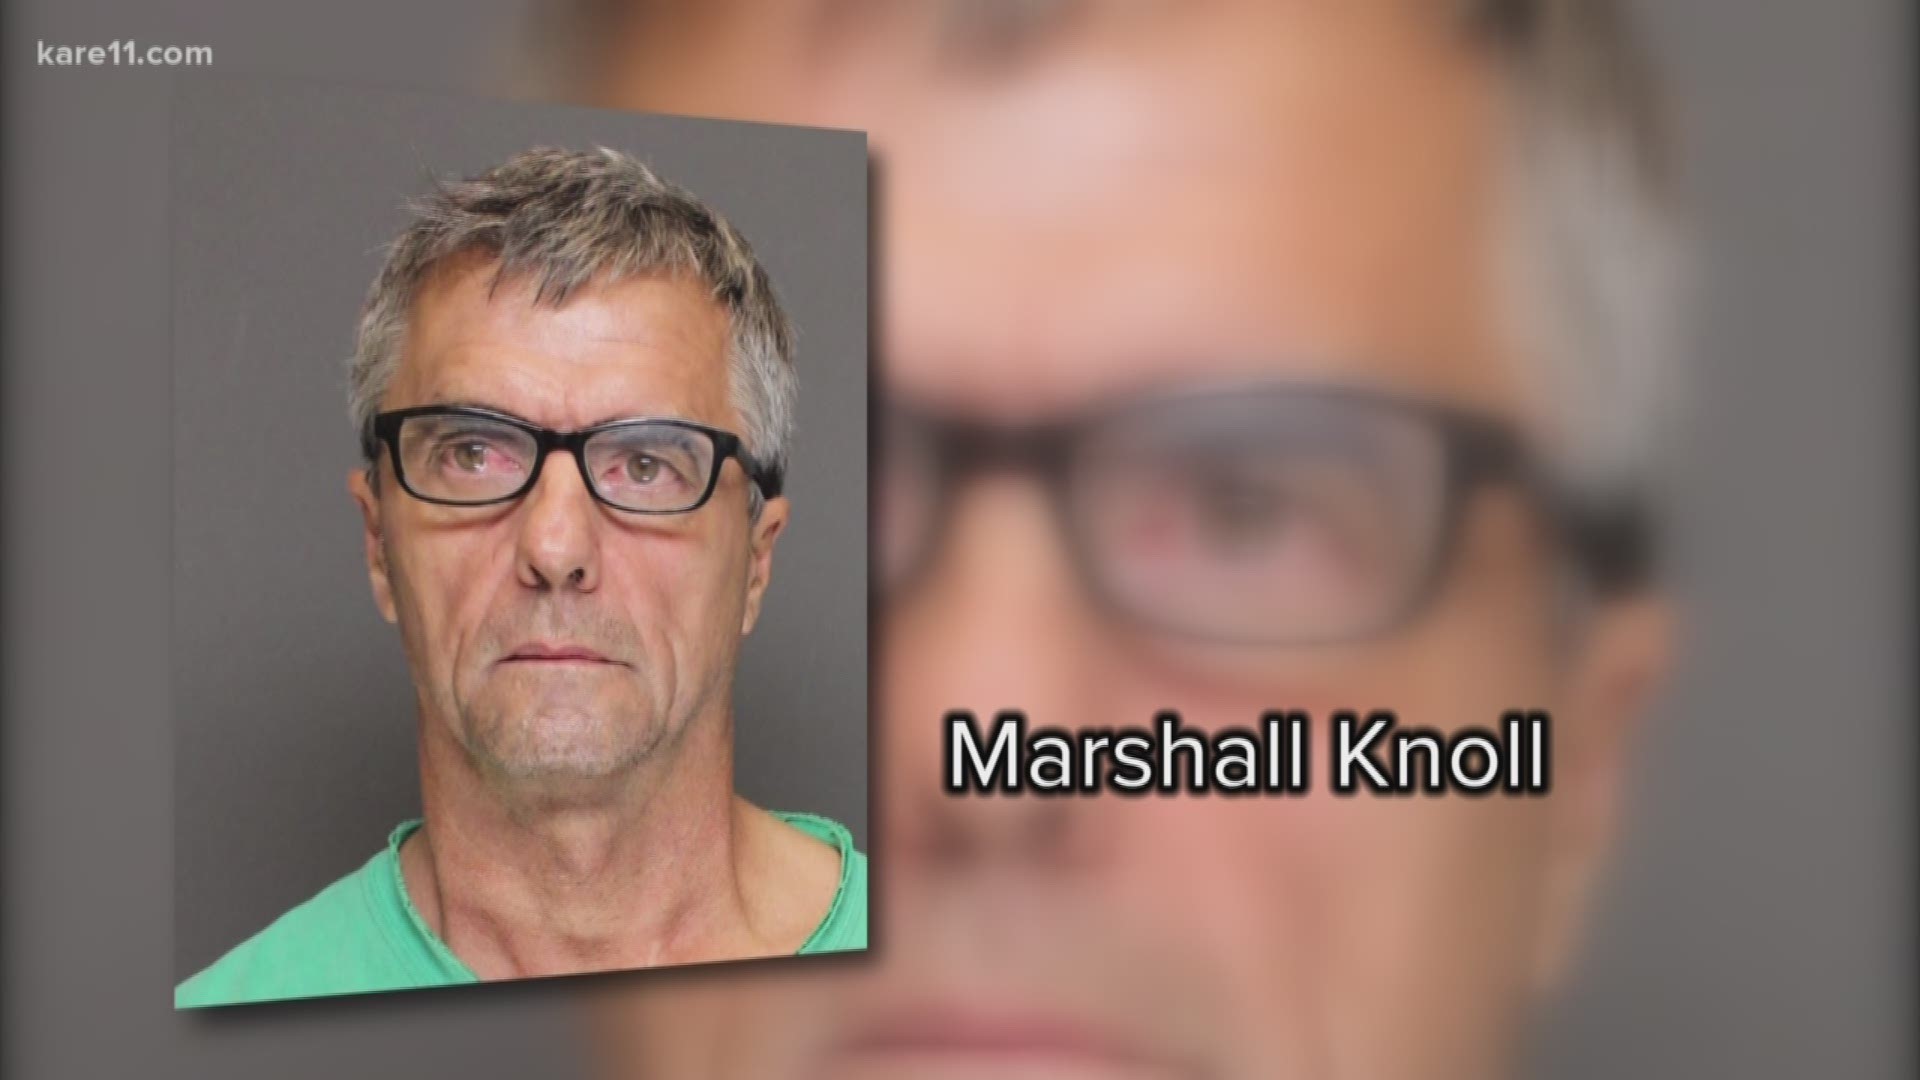 Marshall Knoll, of Rosemount, has 17 DWI convictions dating back to 1979, according to the Dakota County Attorney's Office. https://kare11.tv/2LaOgGC